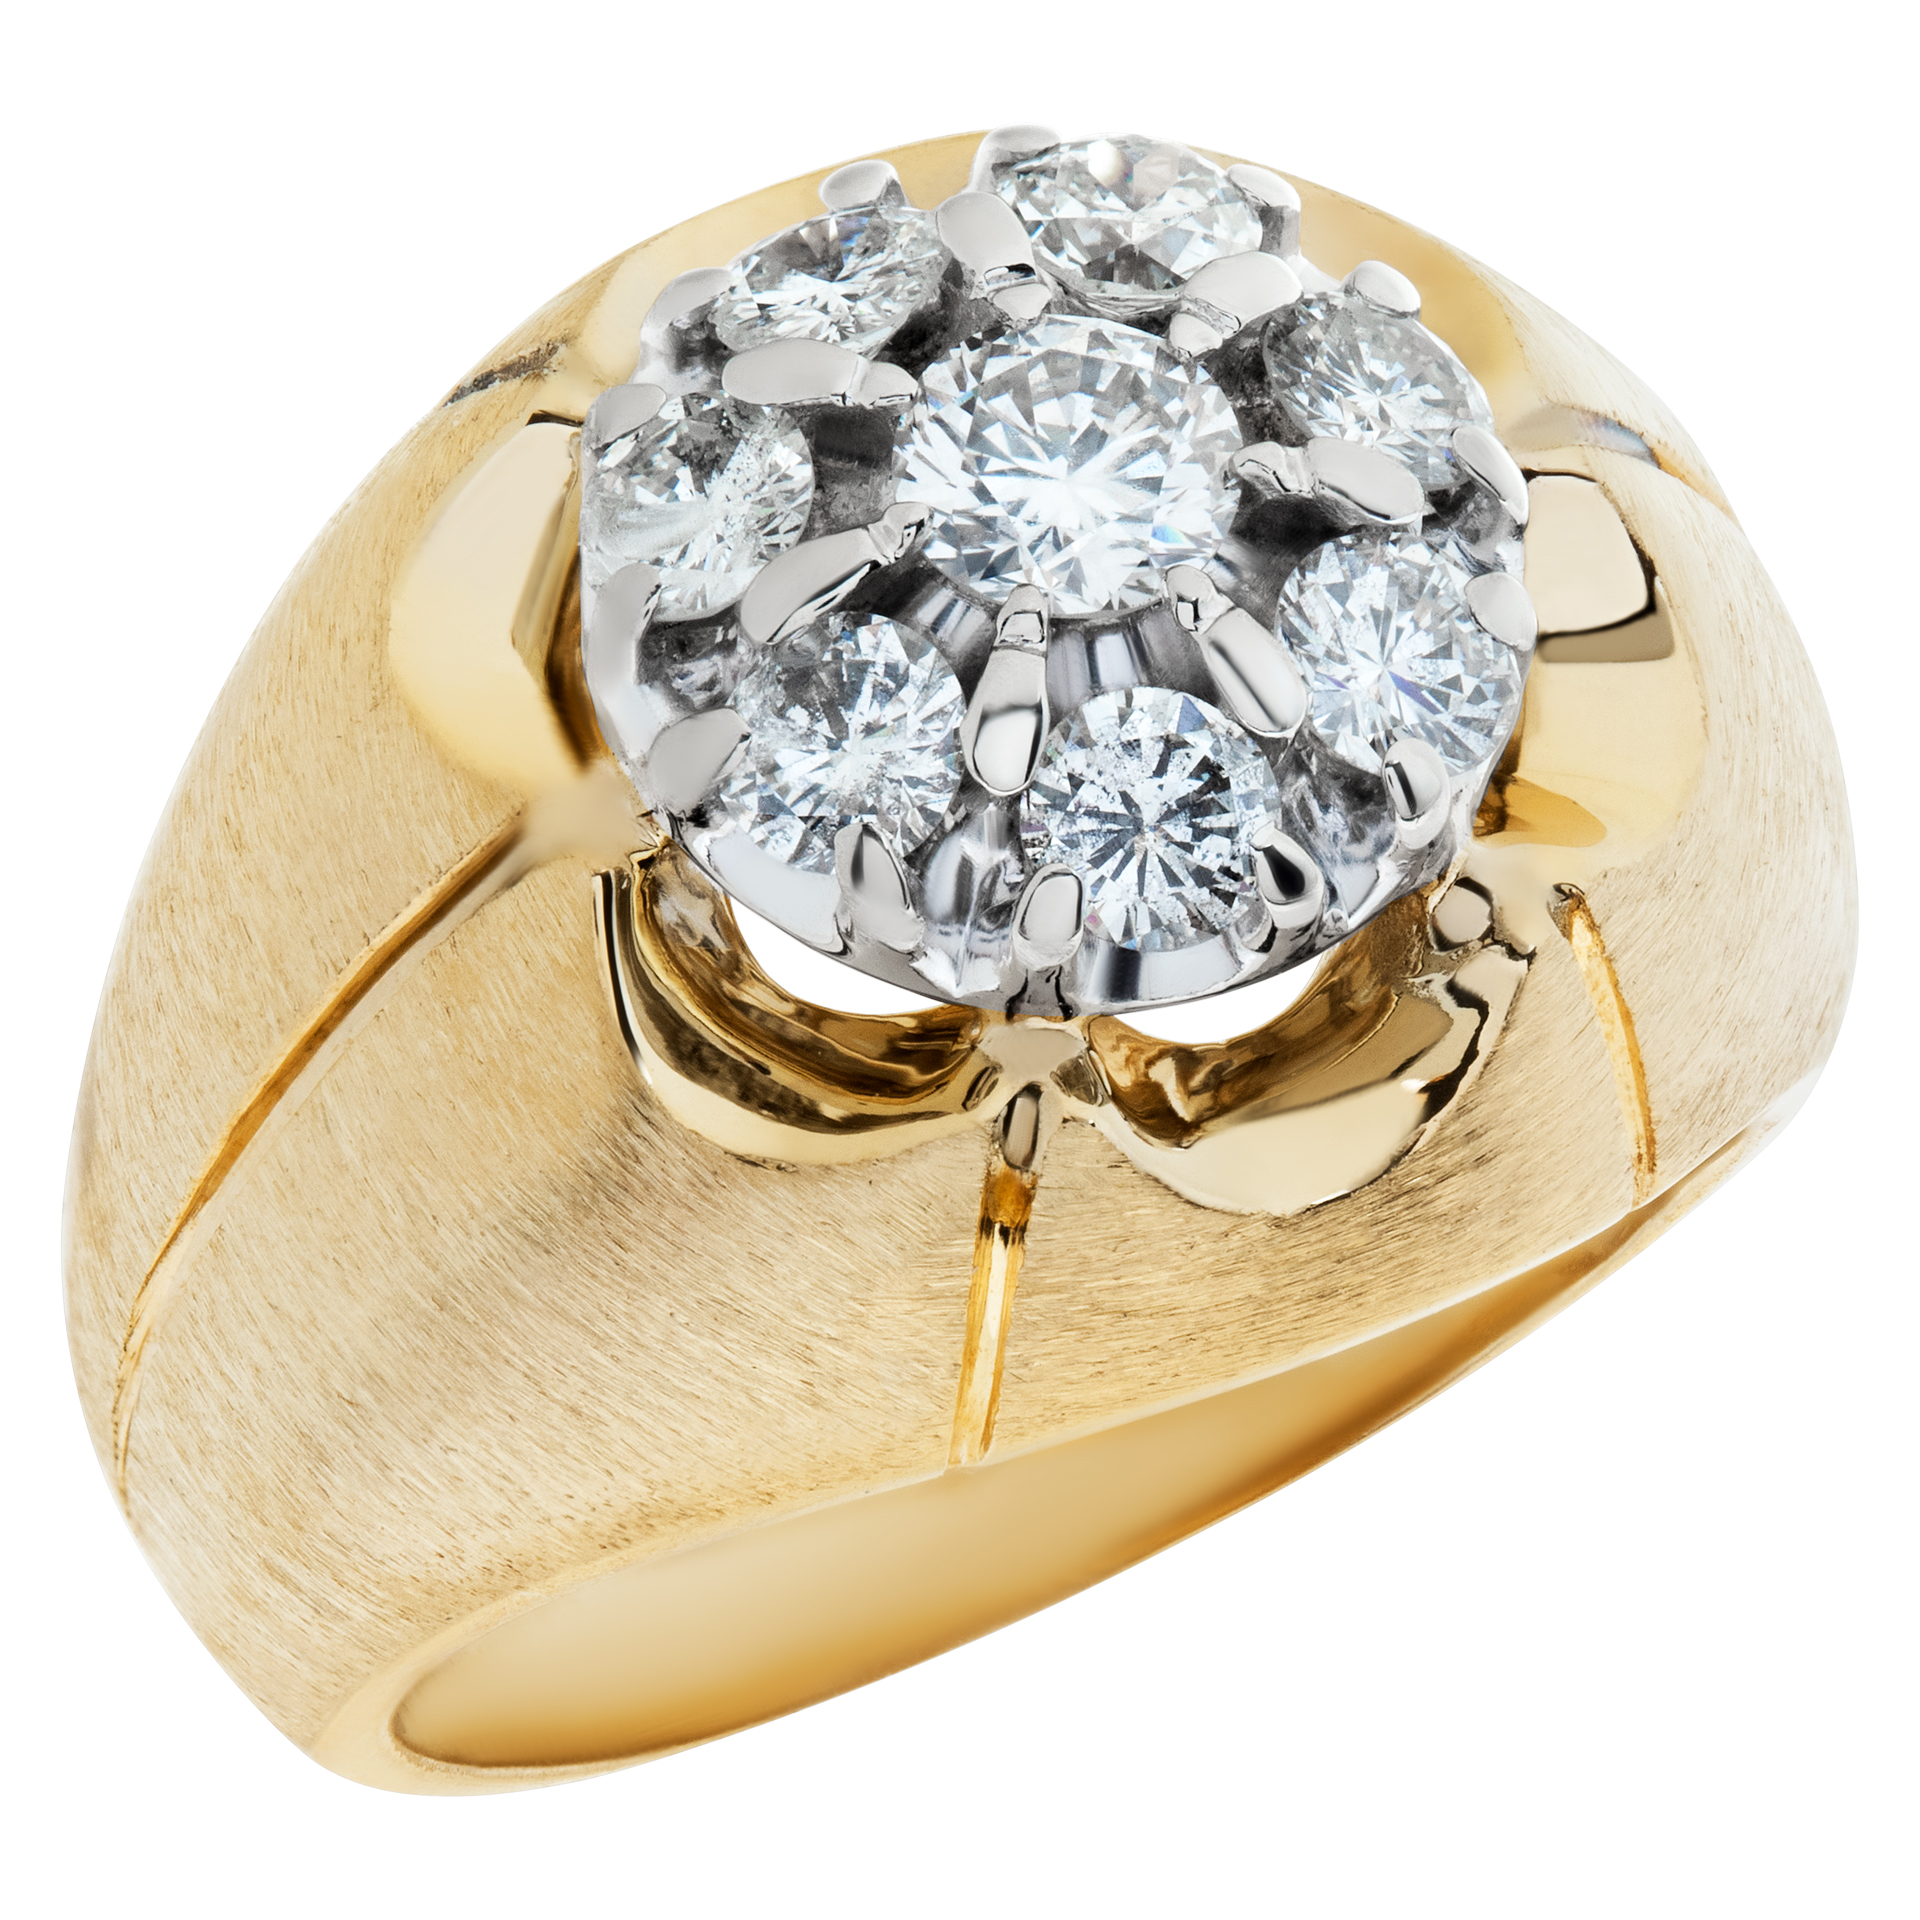 Attractive diamond ring in 14k yellow gold. 1.00 carats in diamonds. Size 8 image 3